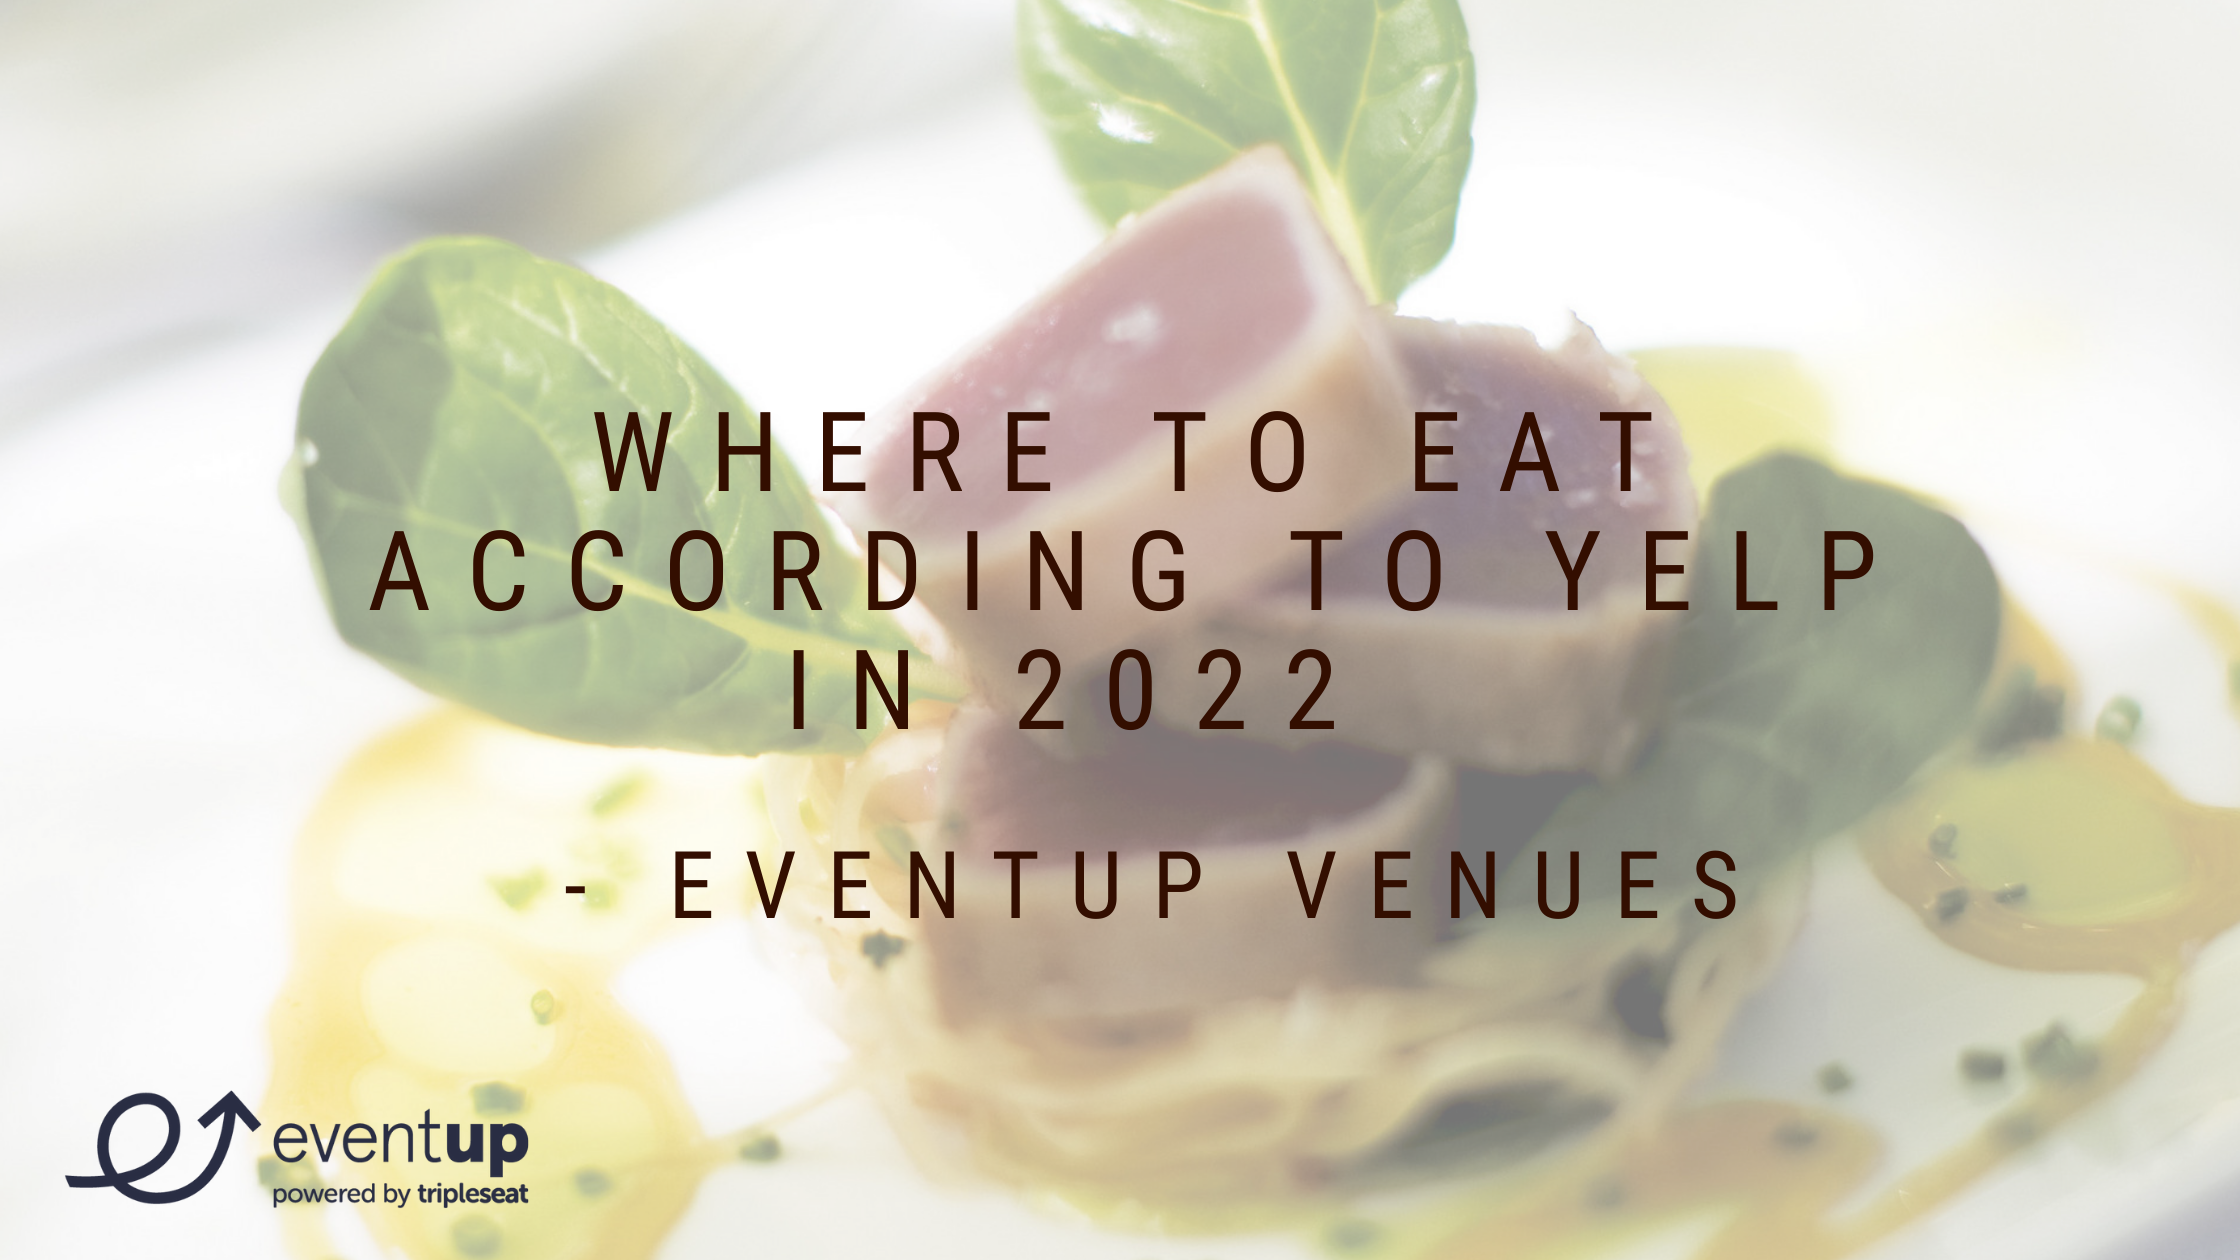 Where to eat according to Yelp in 2022  - EventUp Venues 